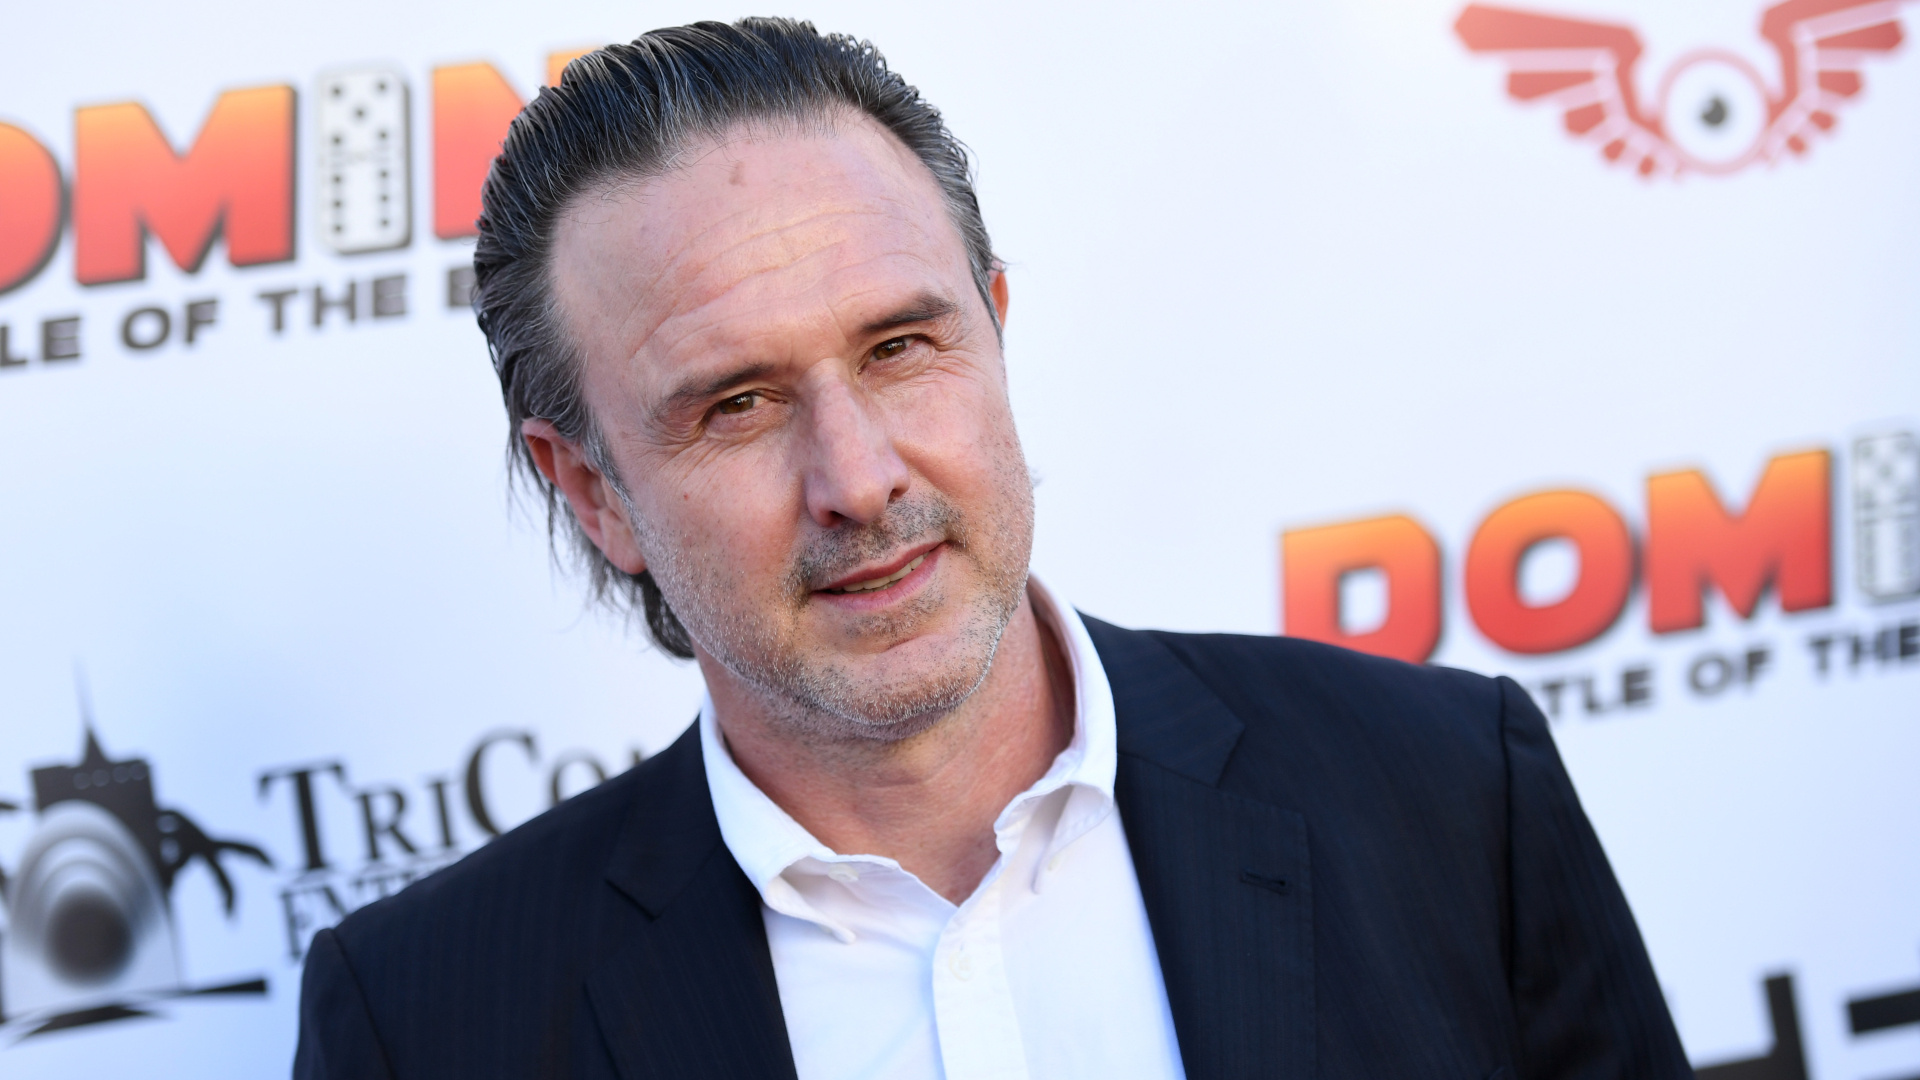 David Arquette, Son's reaction, Scream poster, What to Watch, 1920x1080 Full HD Desktop